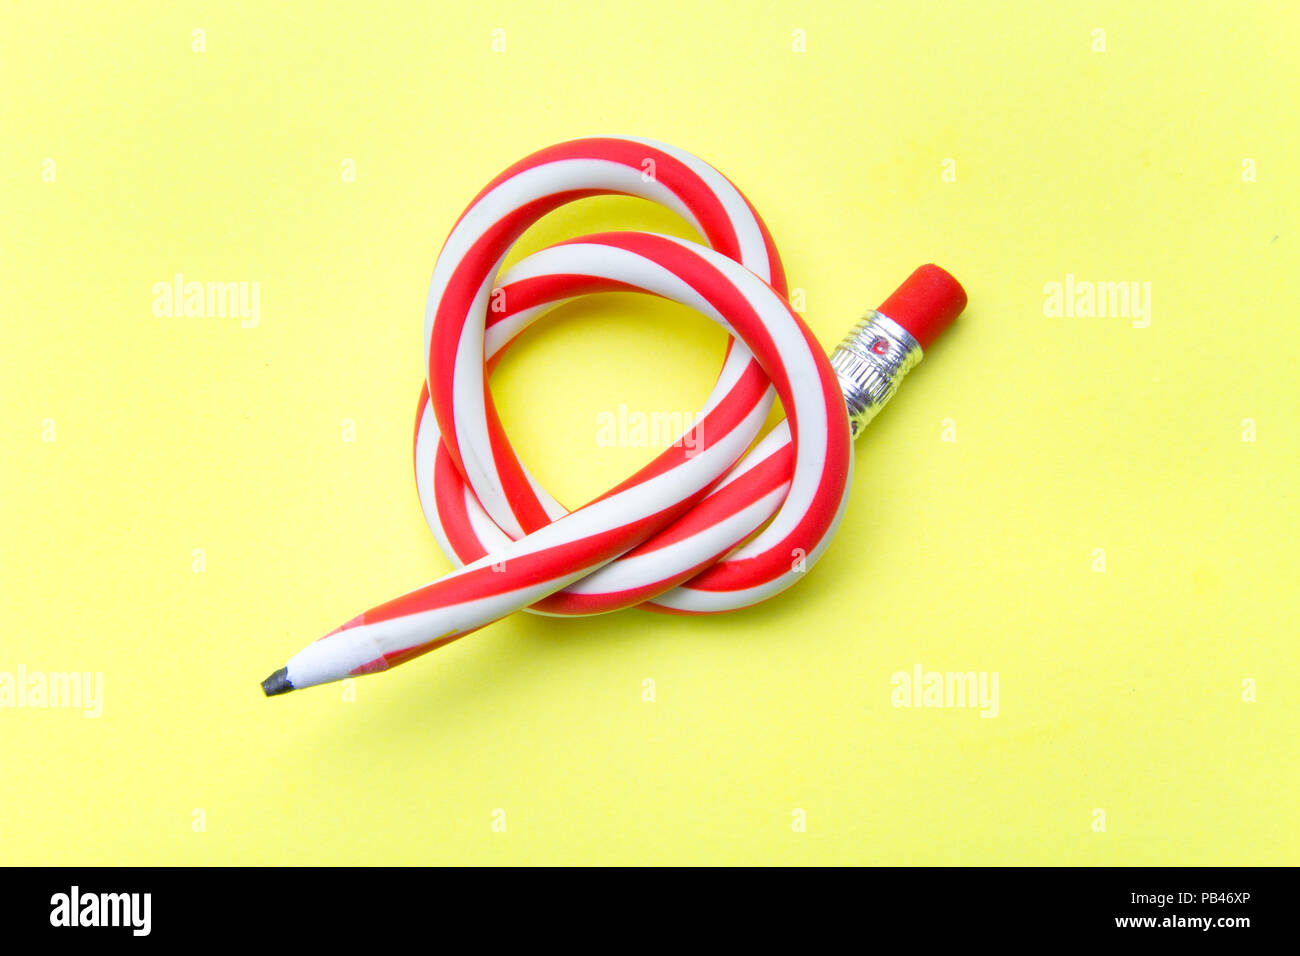 Flexible pencil on a turquoise notebook. Bent pencils two-color Stock Photo  - Alamy